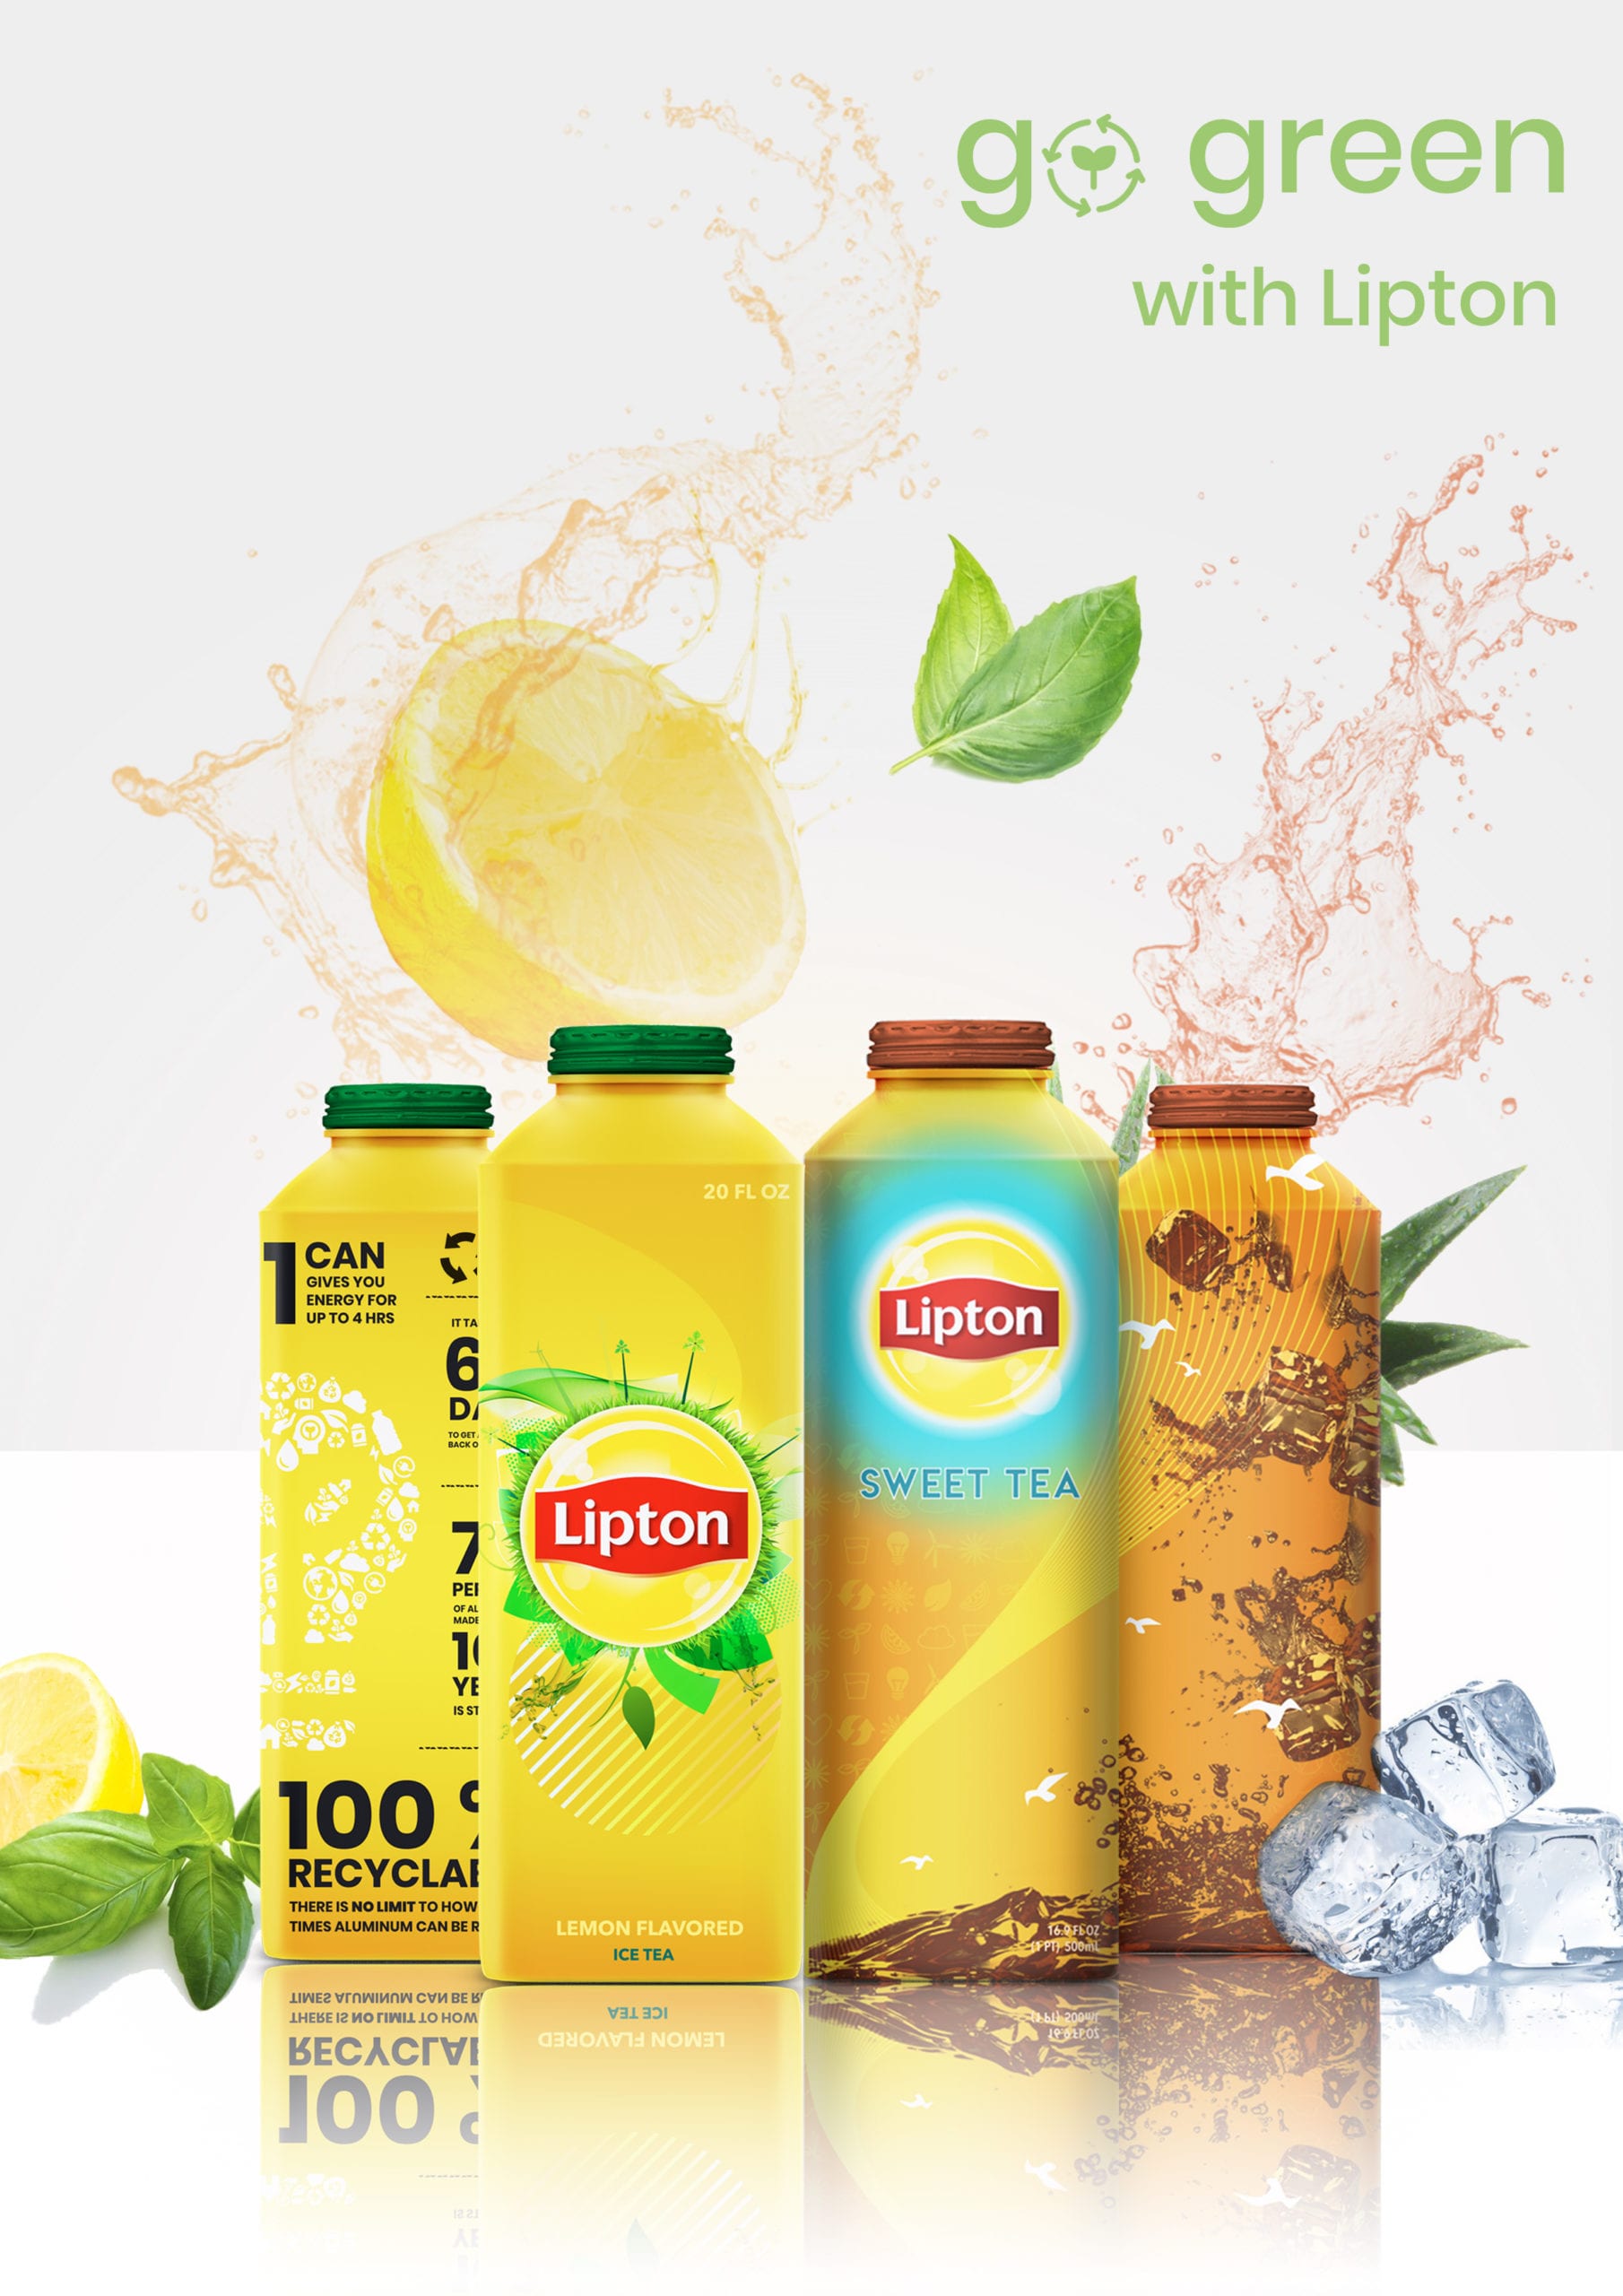 Lipton Iced Tea product packaging redesign